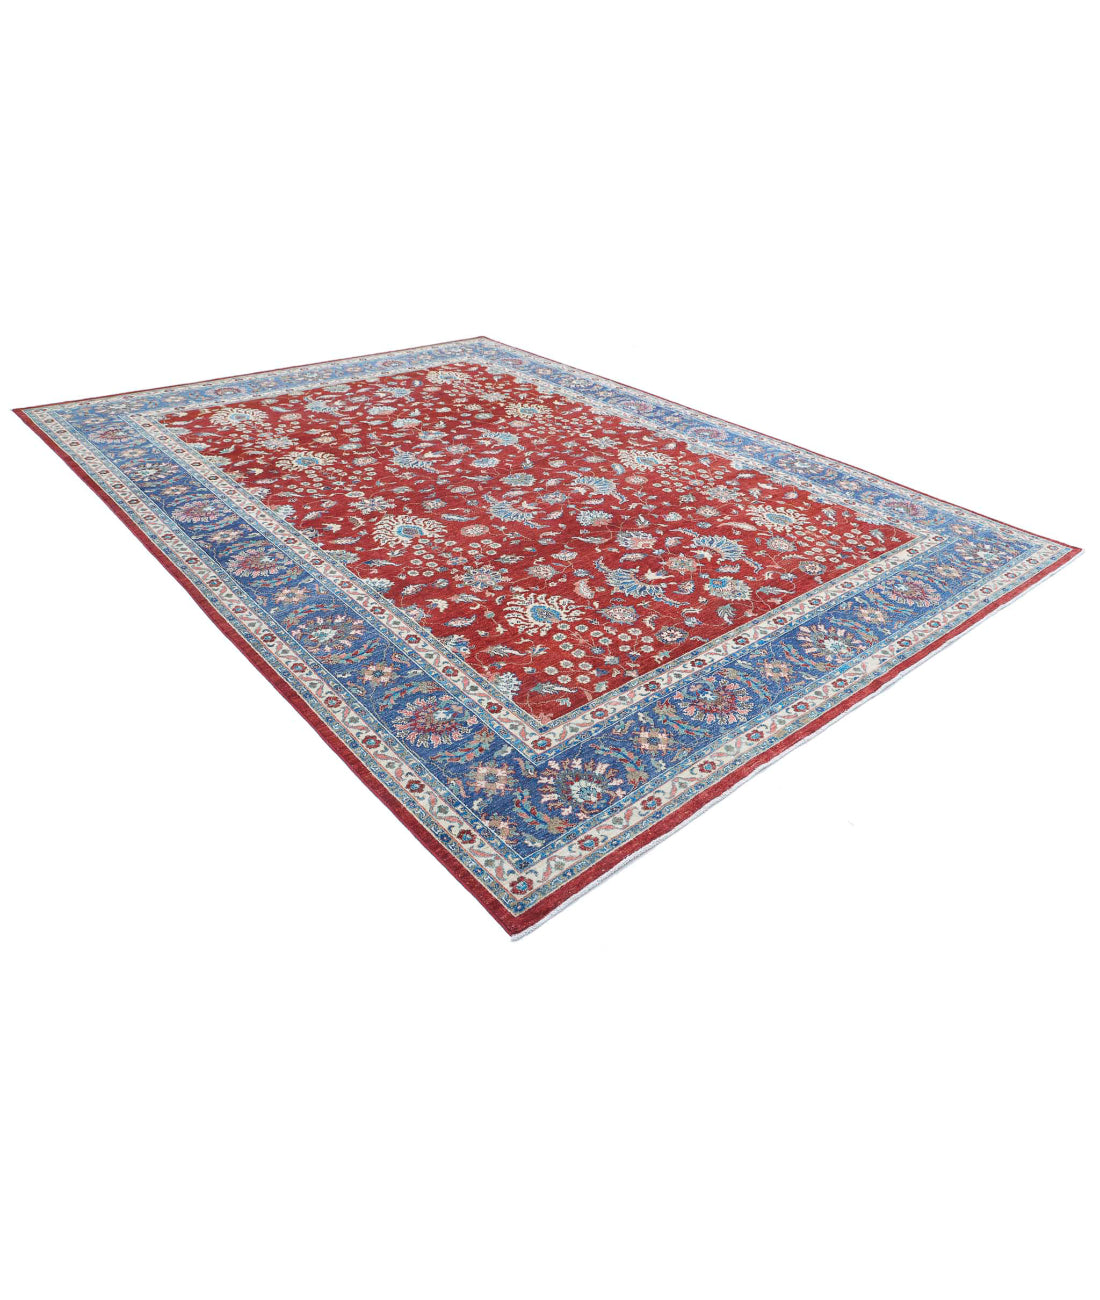 Ziegler 9'9'' X 13'2'' Hand-Knotted Wool Rug 9'9'' x 13'2'' (293 X 395) / Red / Blue